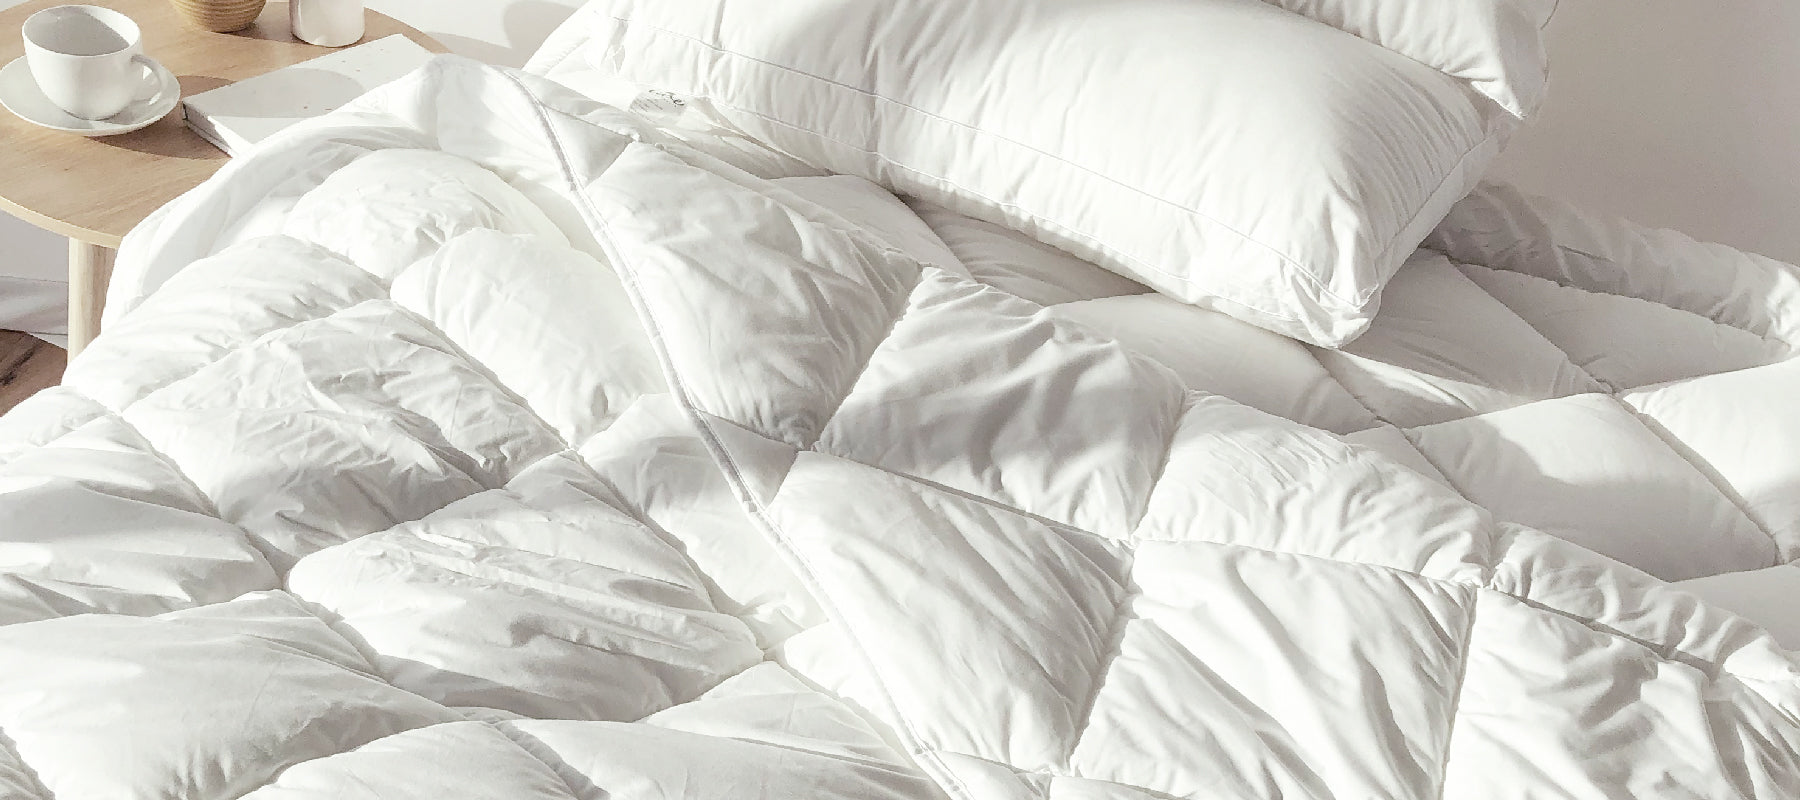 Step by Step: Create Your Perfect Night's Sleep